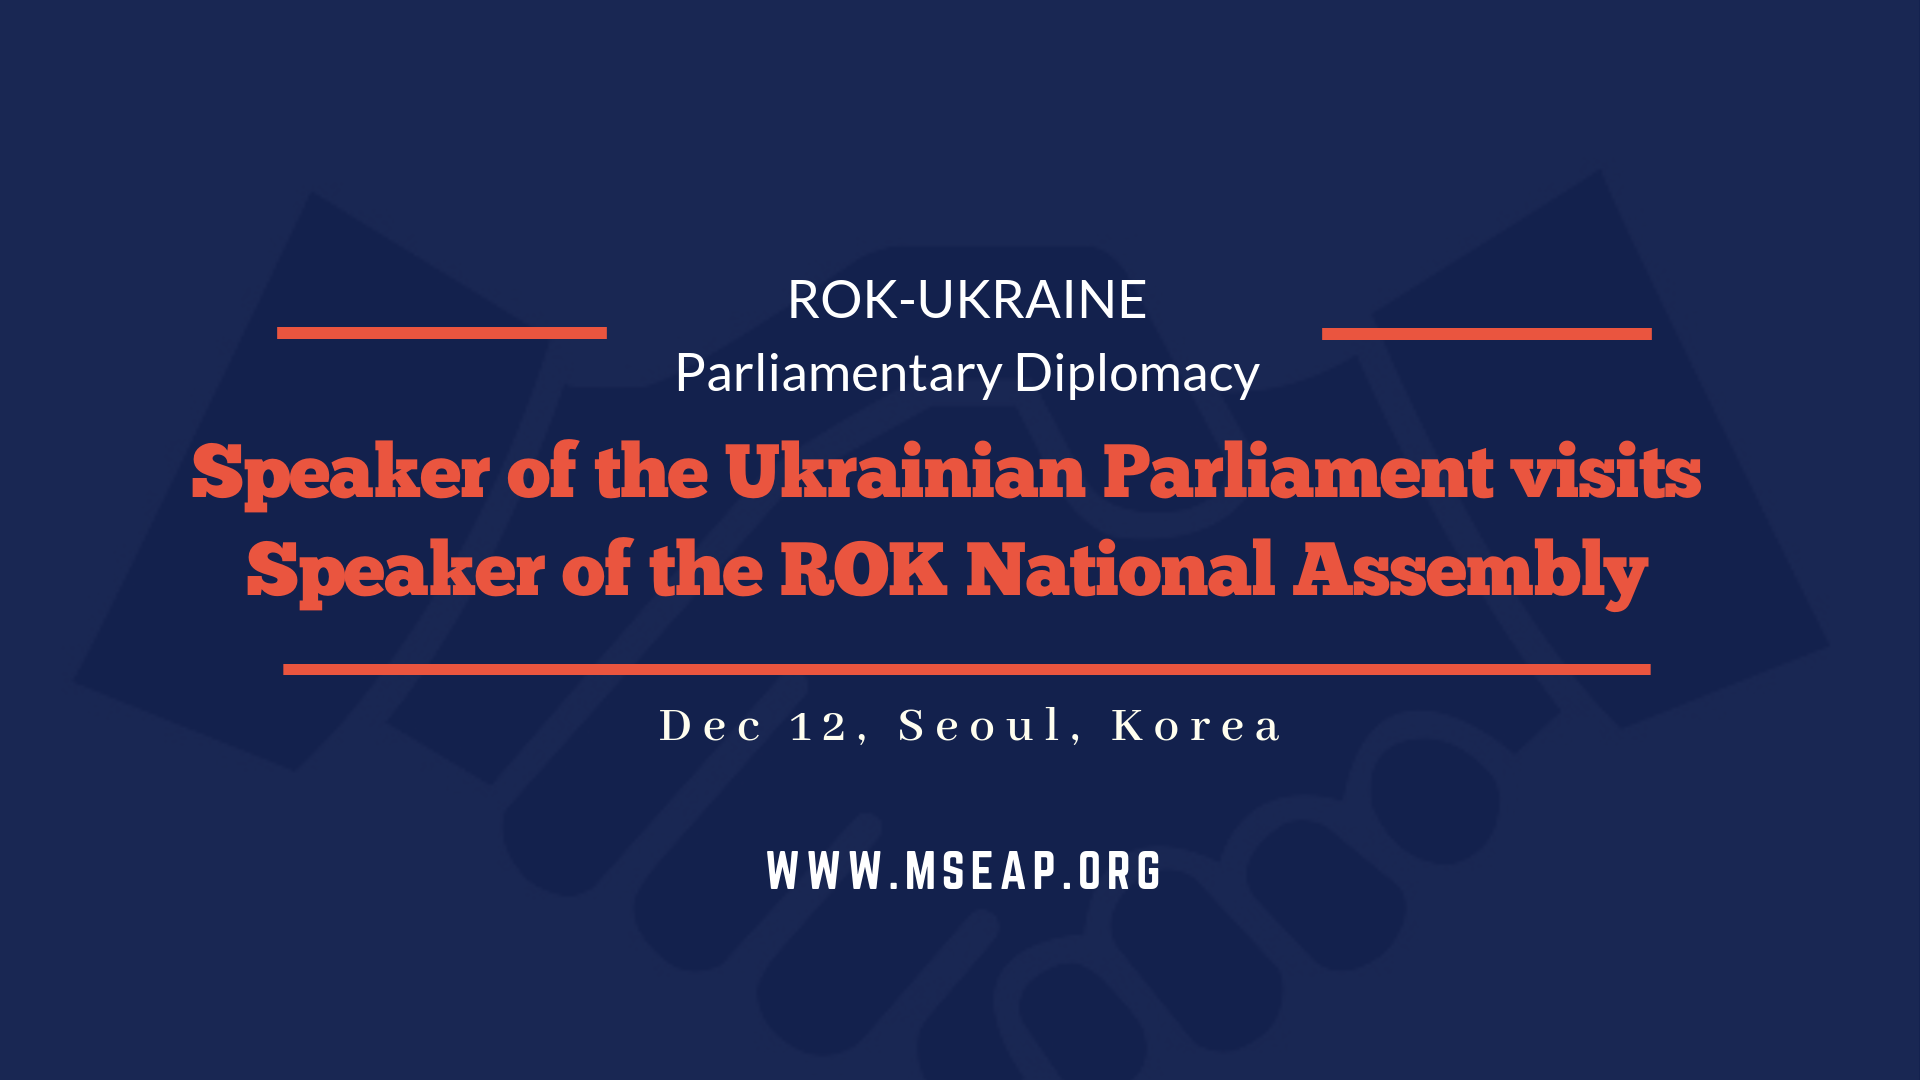 Speaker of the Ukrainian parliament visits the speaker of the ROK National Assembly